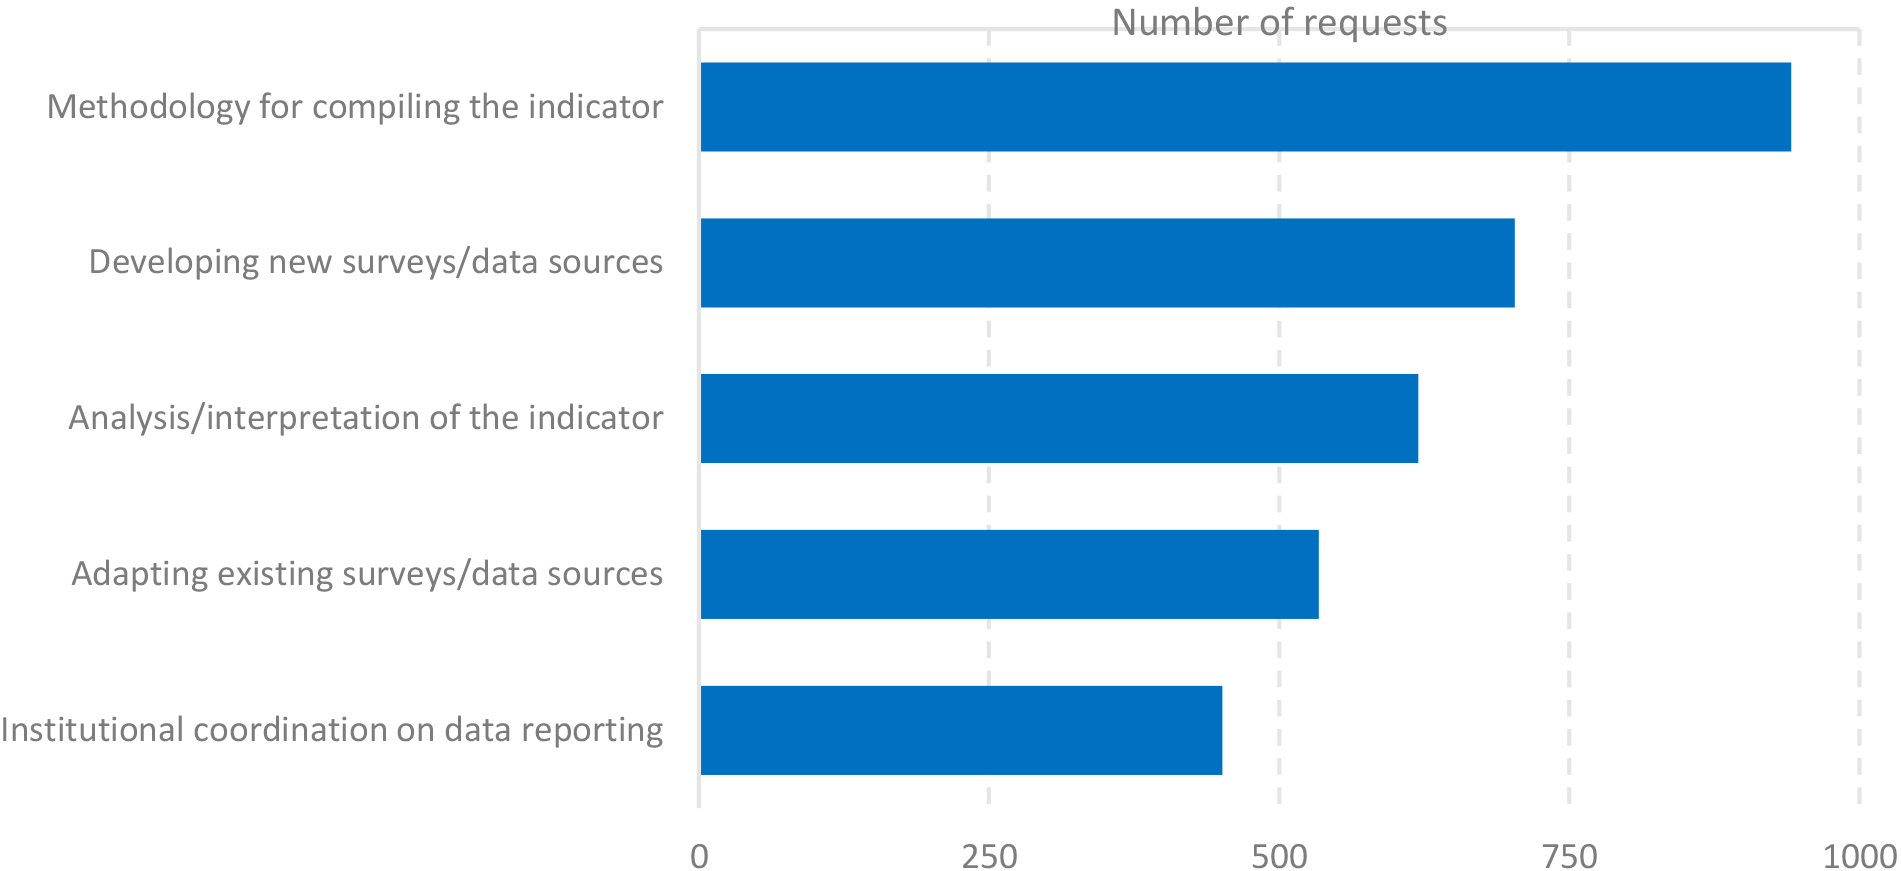 Number of requests for assistance for producing/compiling SDG indicators, by type of assistance.